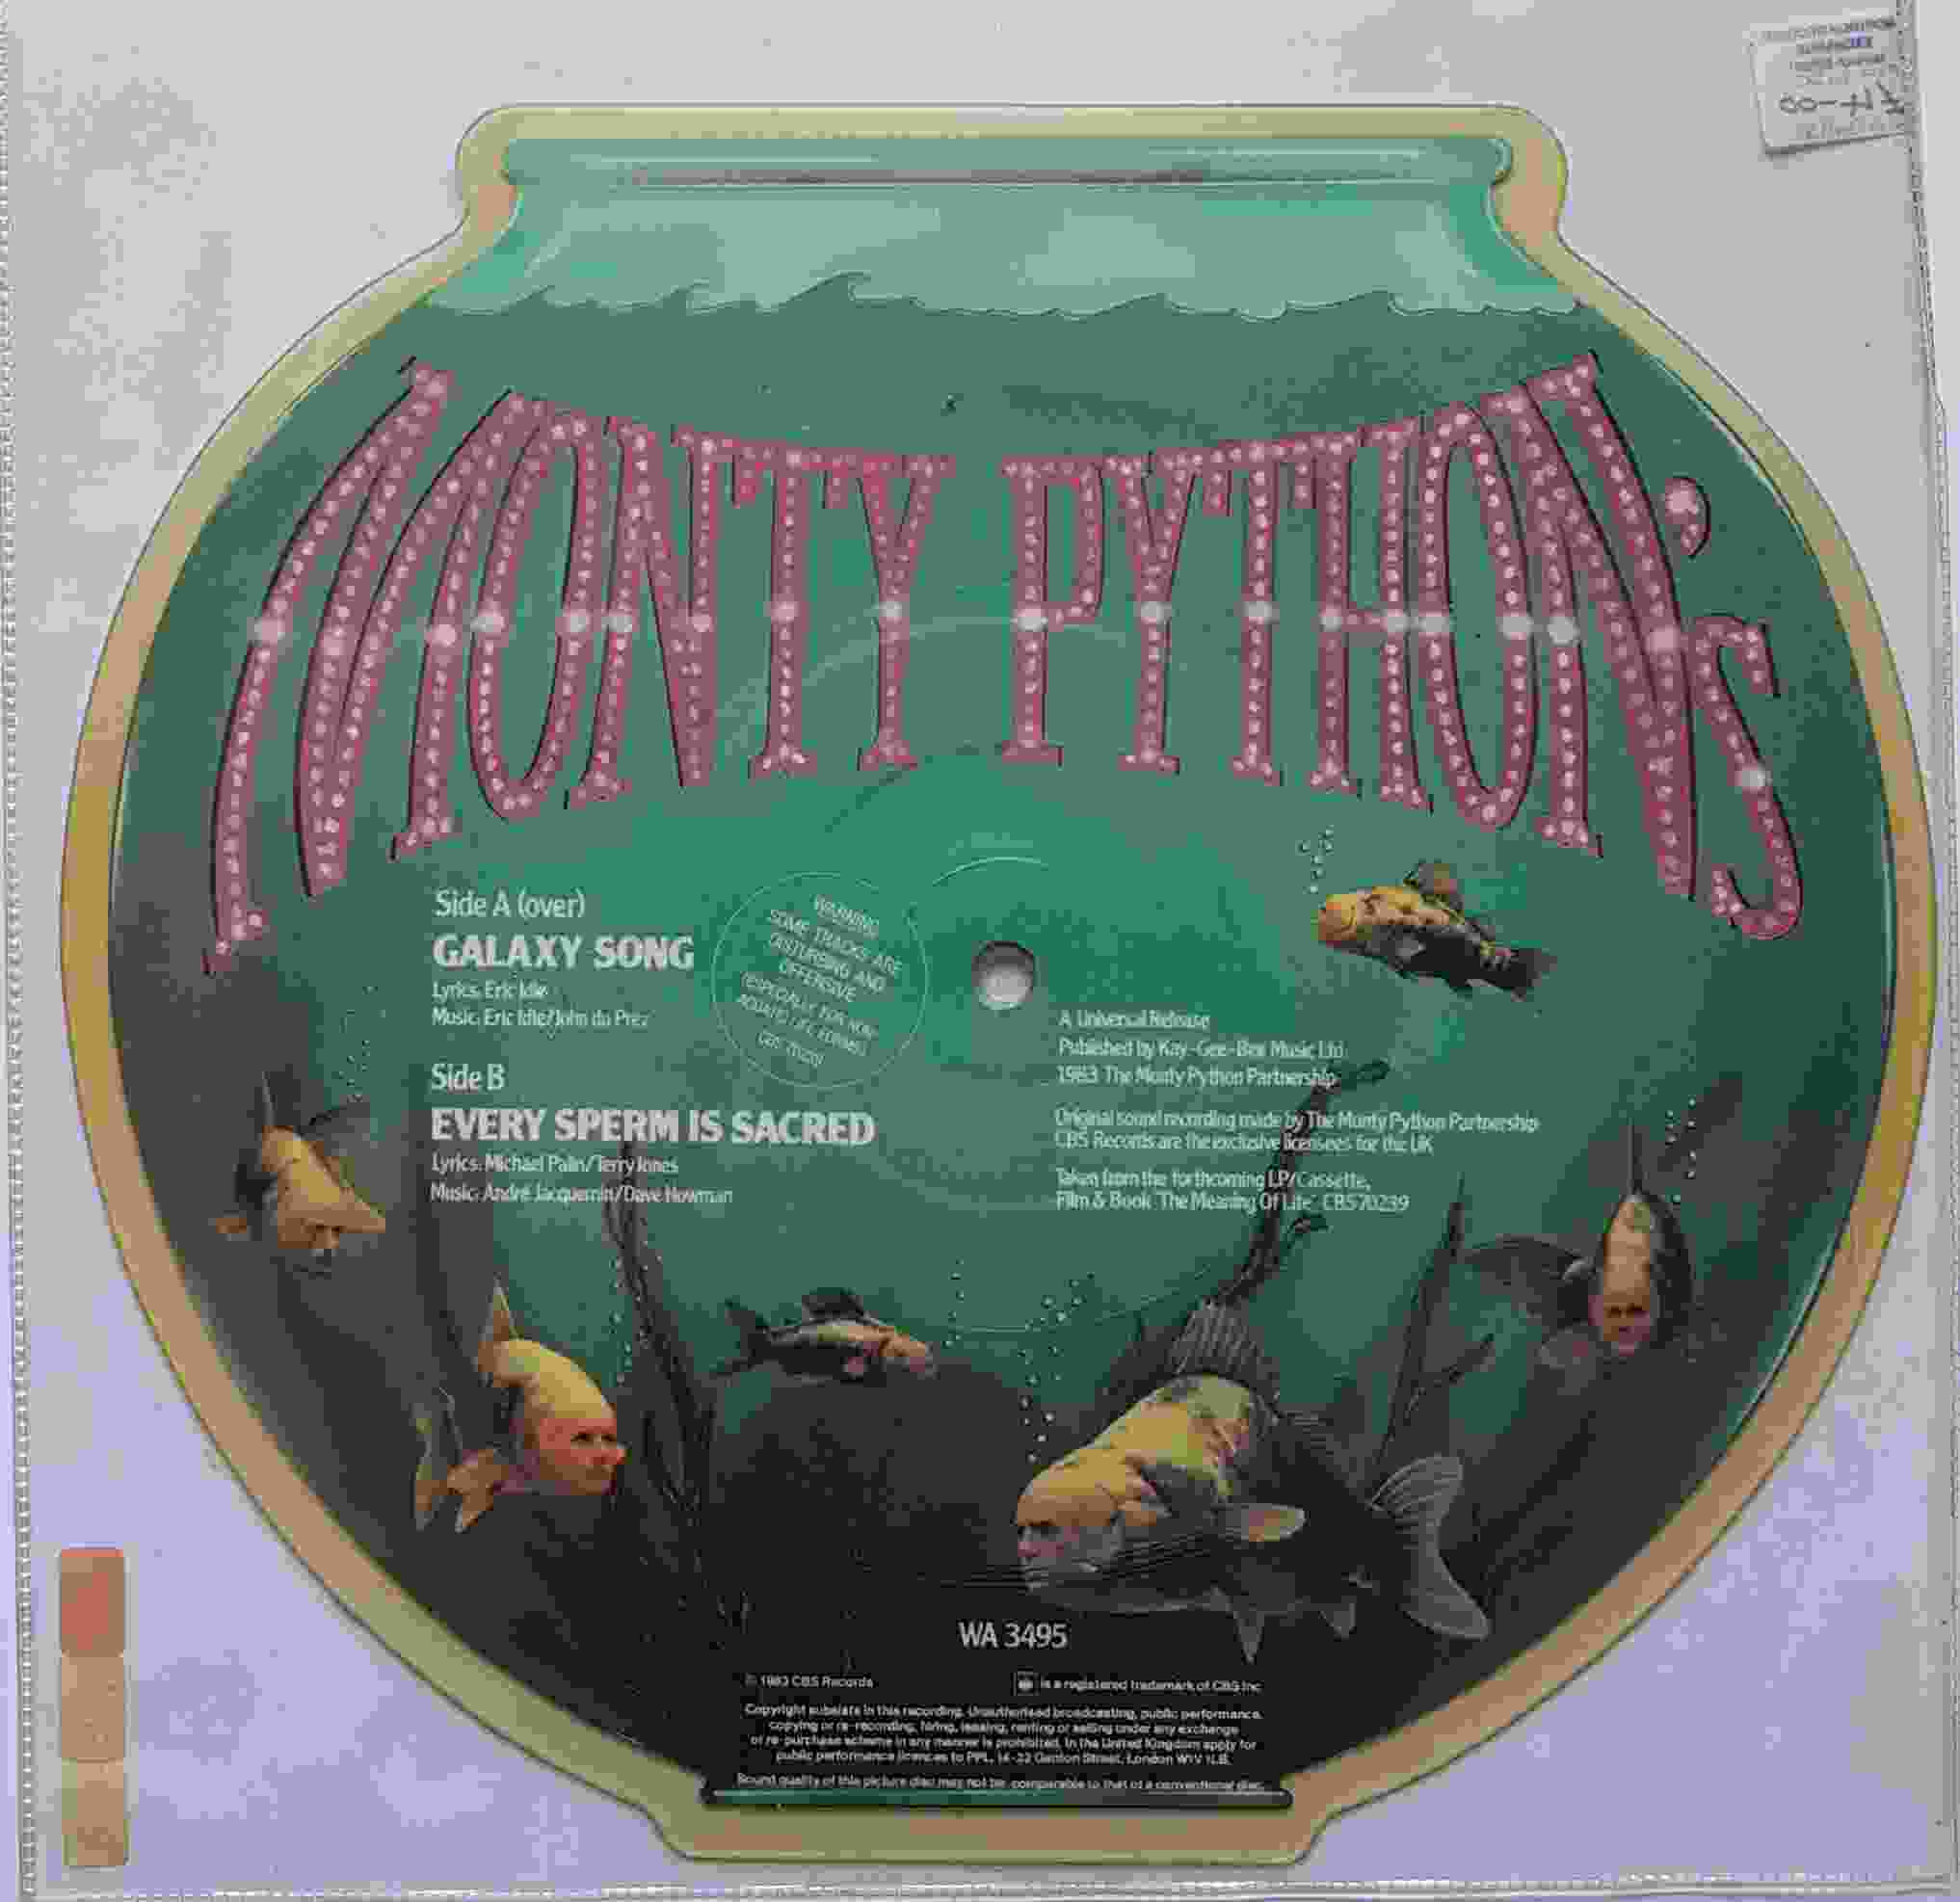 Picture of WA 3495 Galaxy song (Monty Python's flying circus) by artist Monty Python from the BBC records and Tapes library